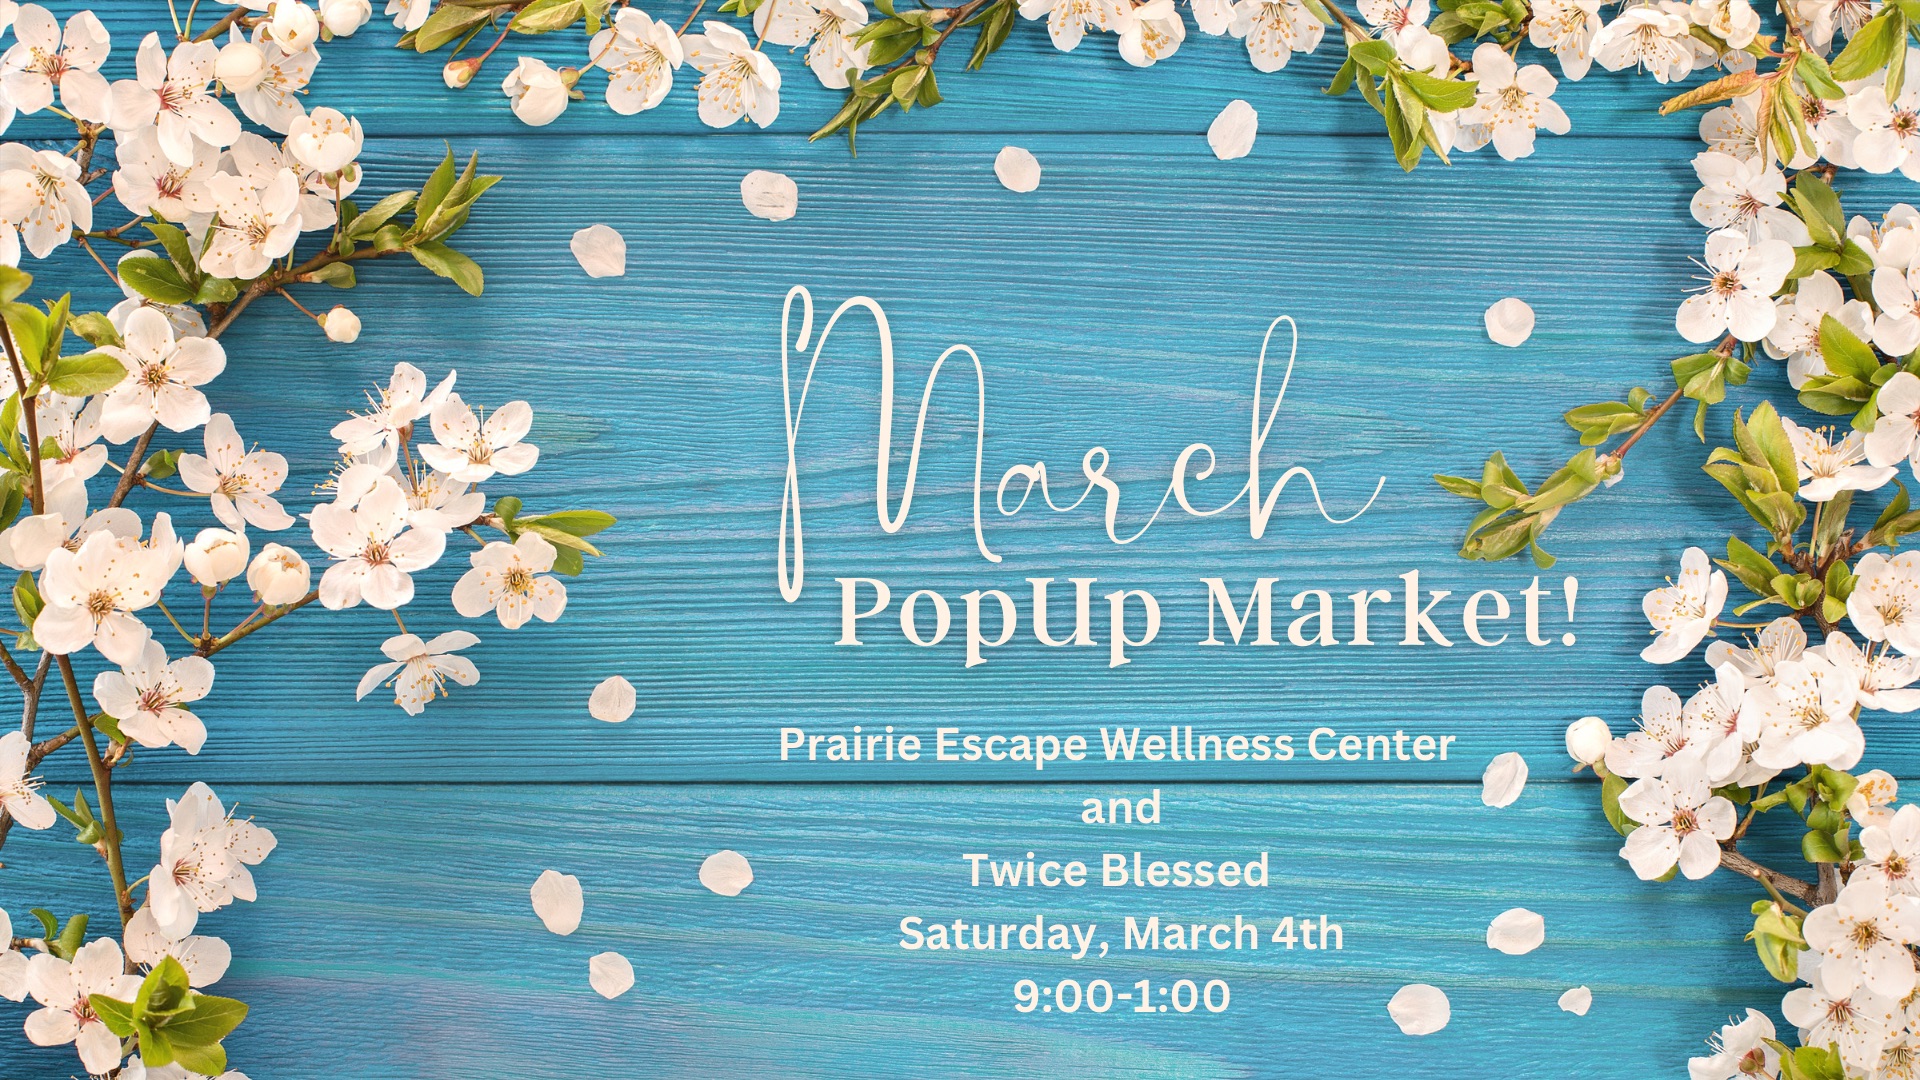 Event Promo Photo For March Pop Up Market